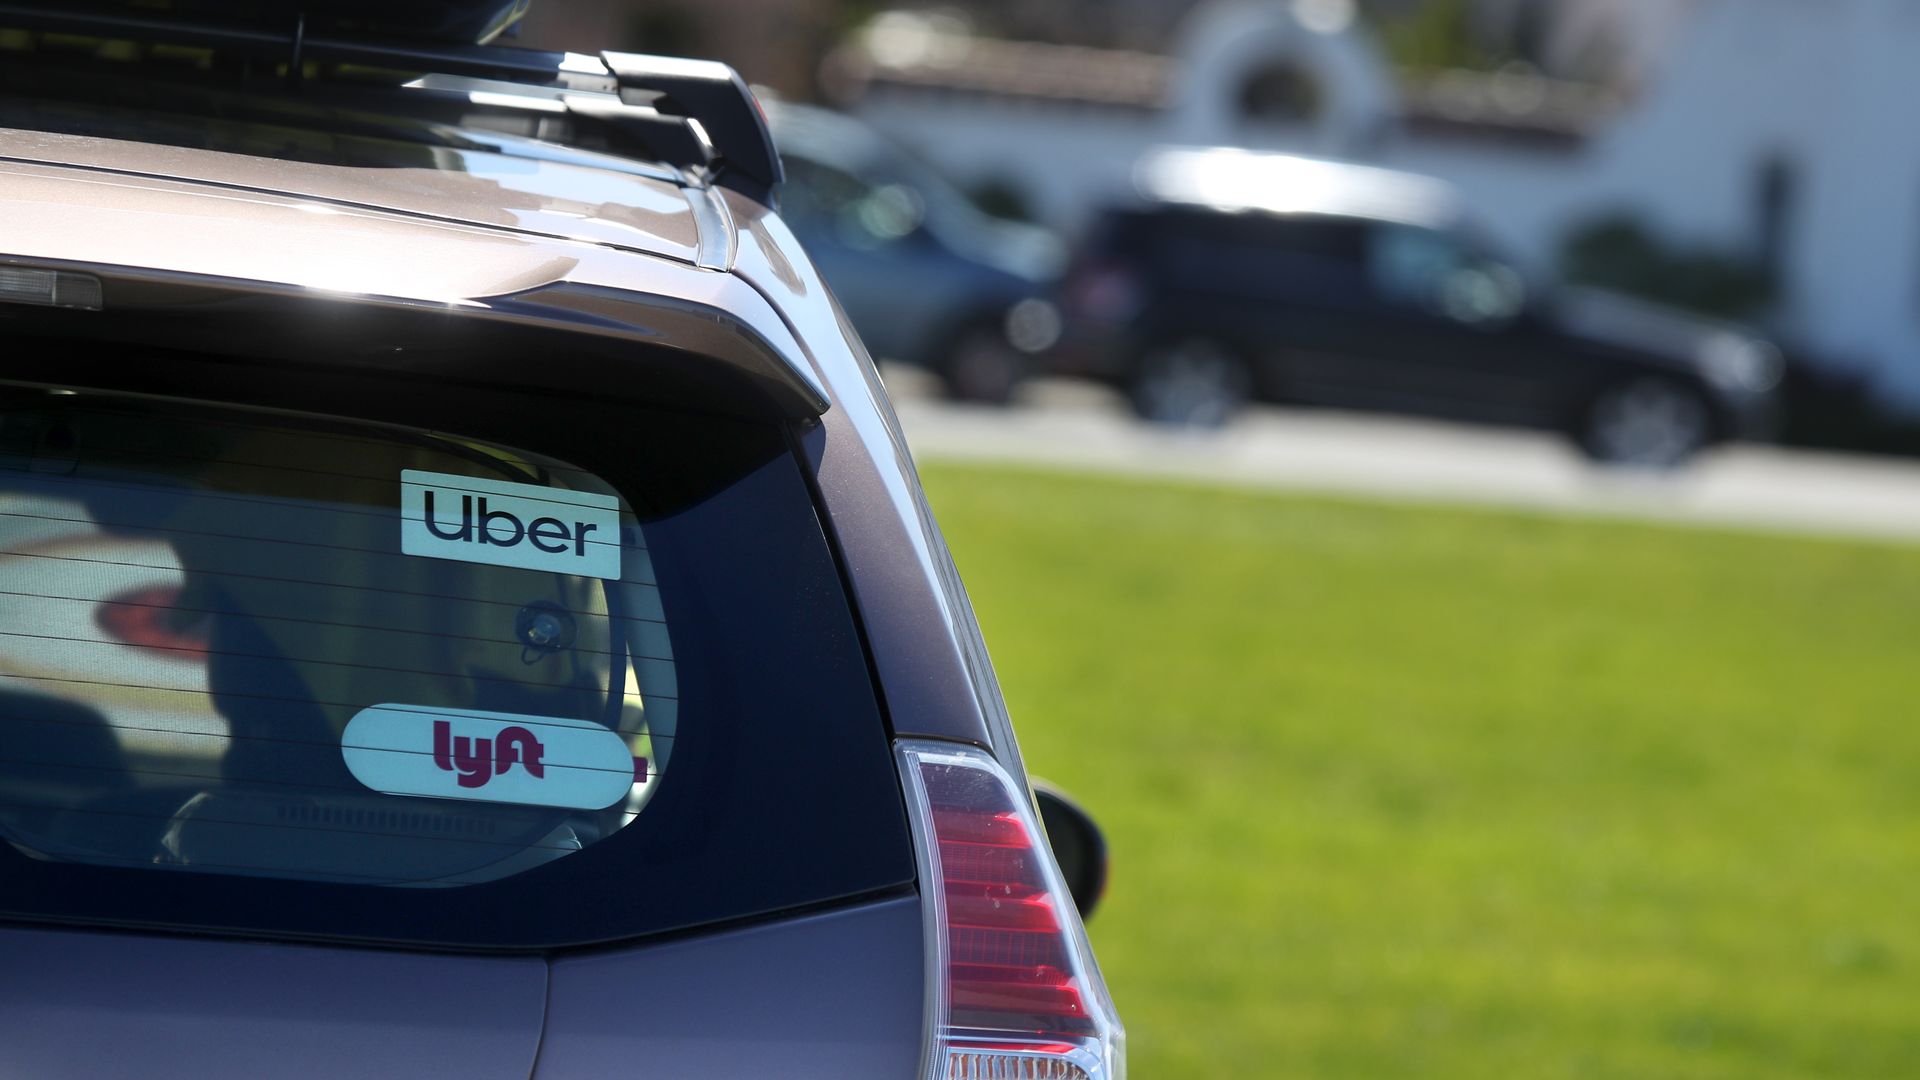 In this image, the back of an SUV car is visible with "Uber" and "Lyft" stickers.